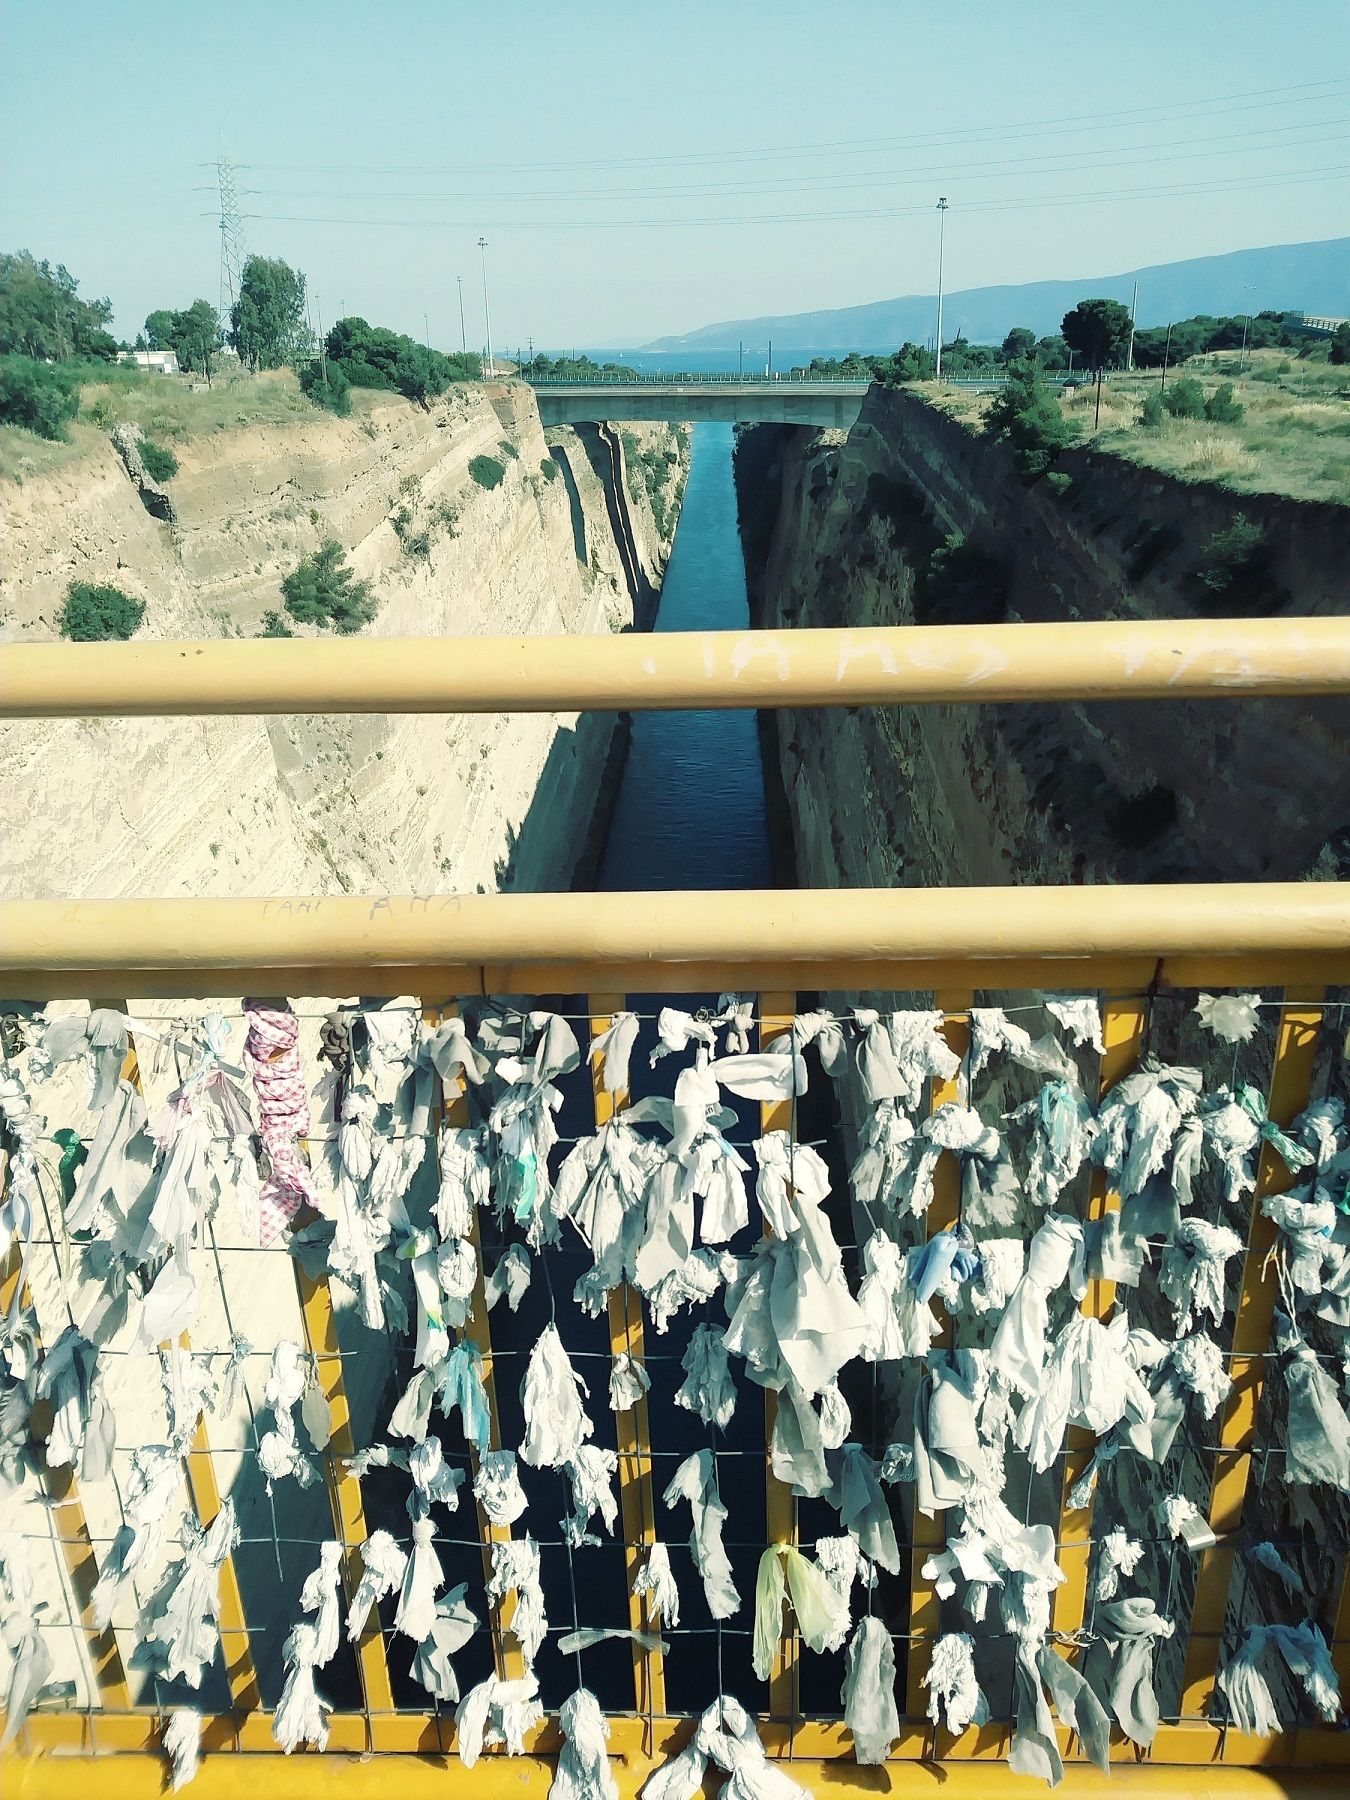 The Corinth Canal, a bridge with ribbons tied to it in the foreground.